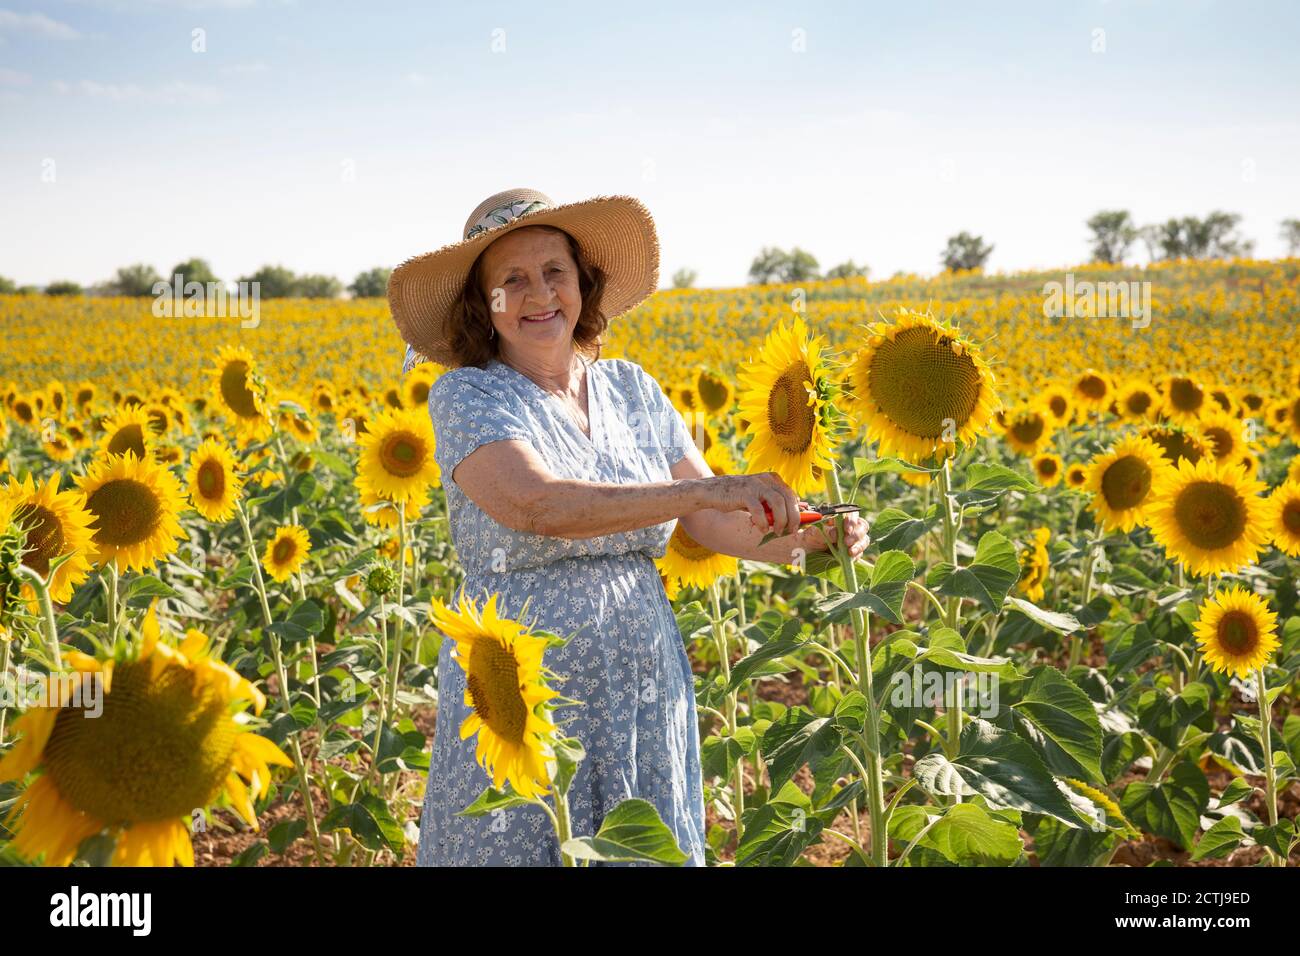 Elderly woman working in sunflower field. Space for text. Stock Photo